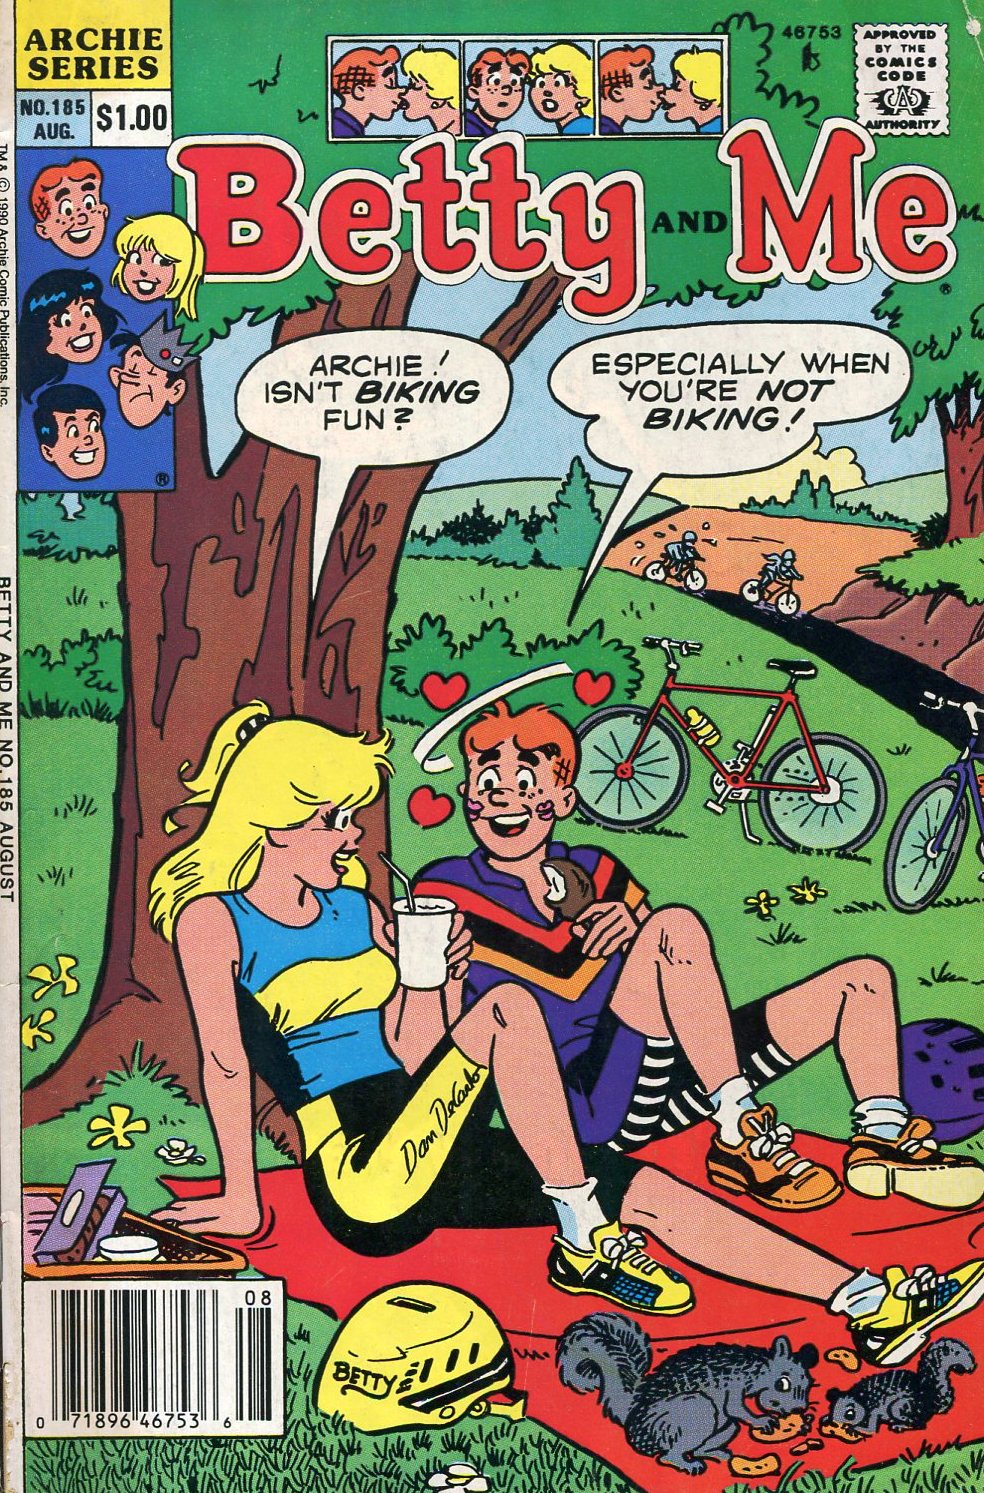 Read online Betty and Me comic -  Issue #185 - 1